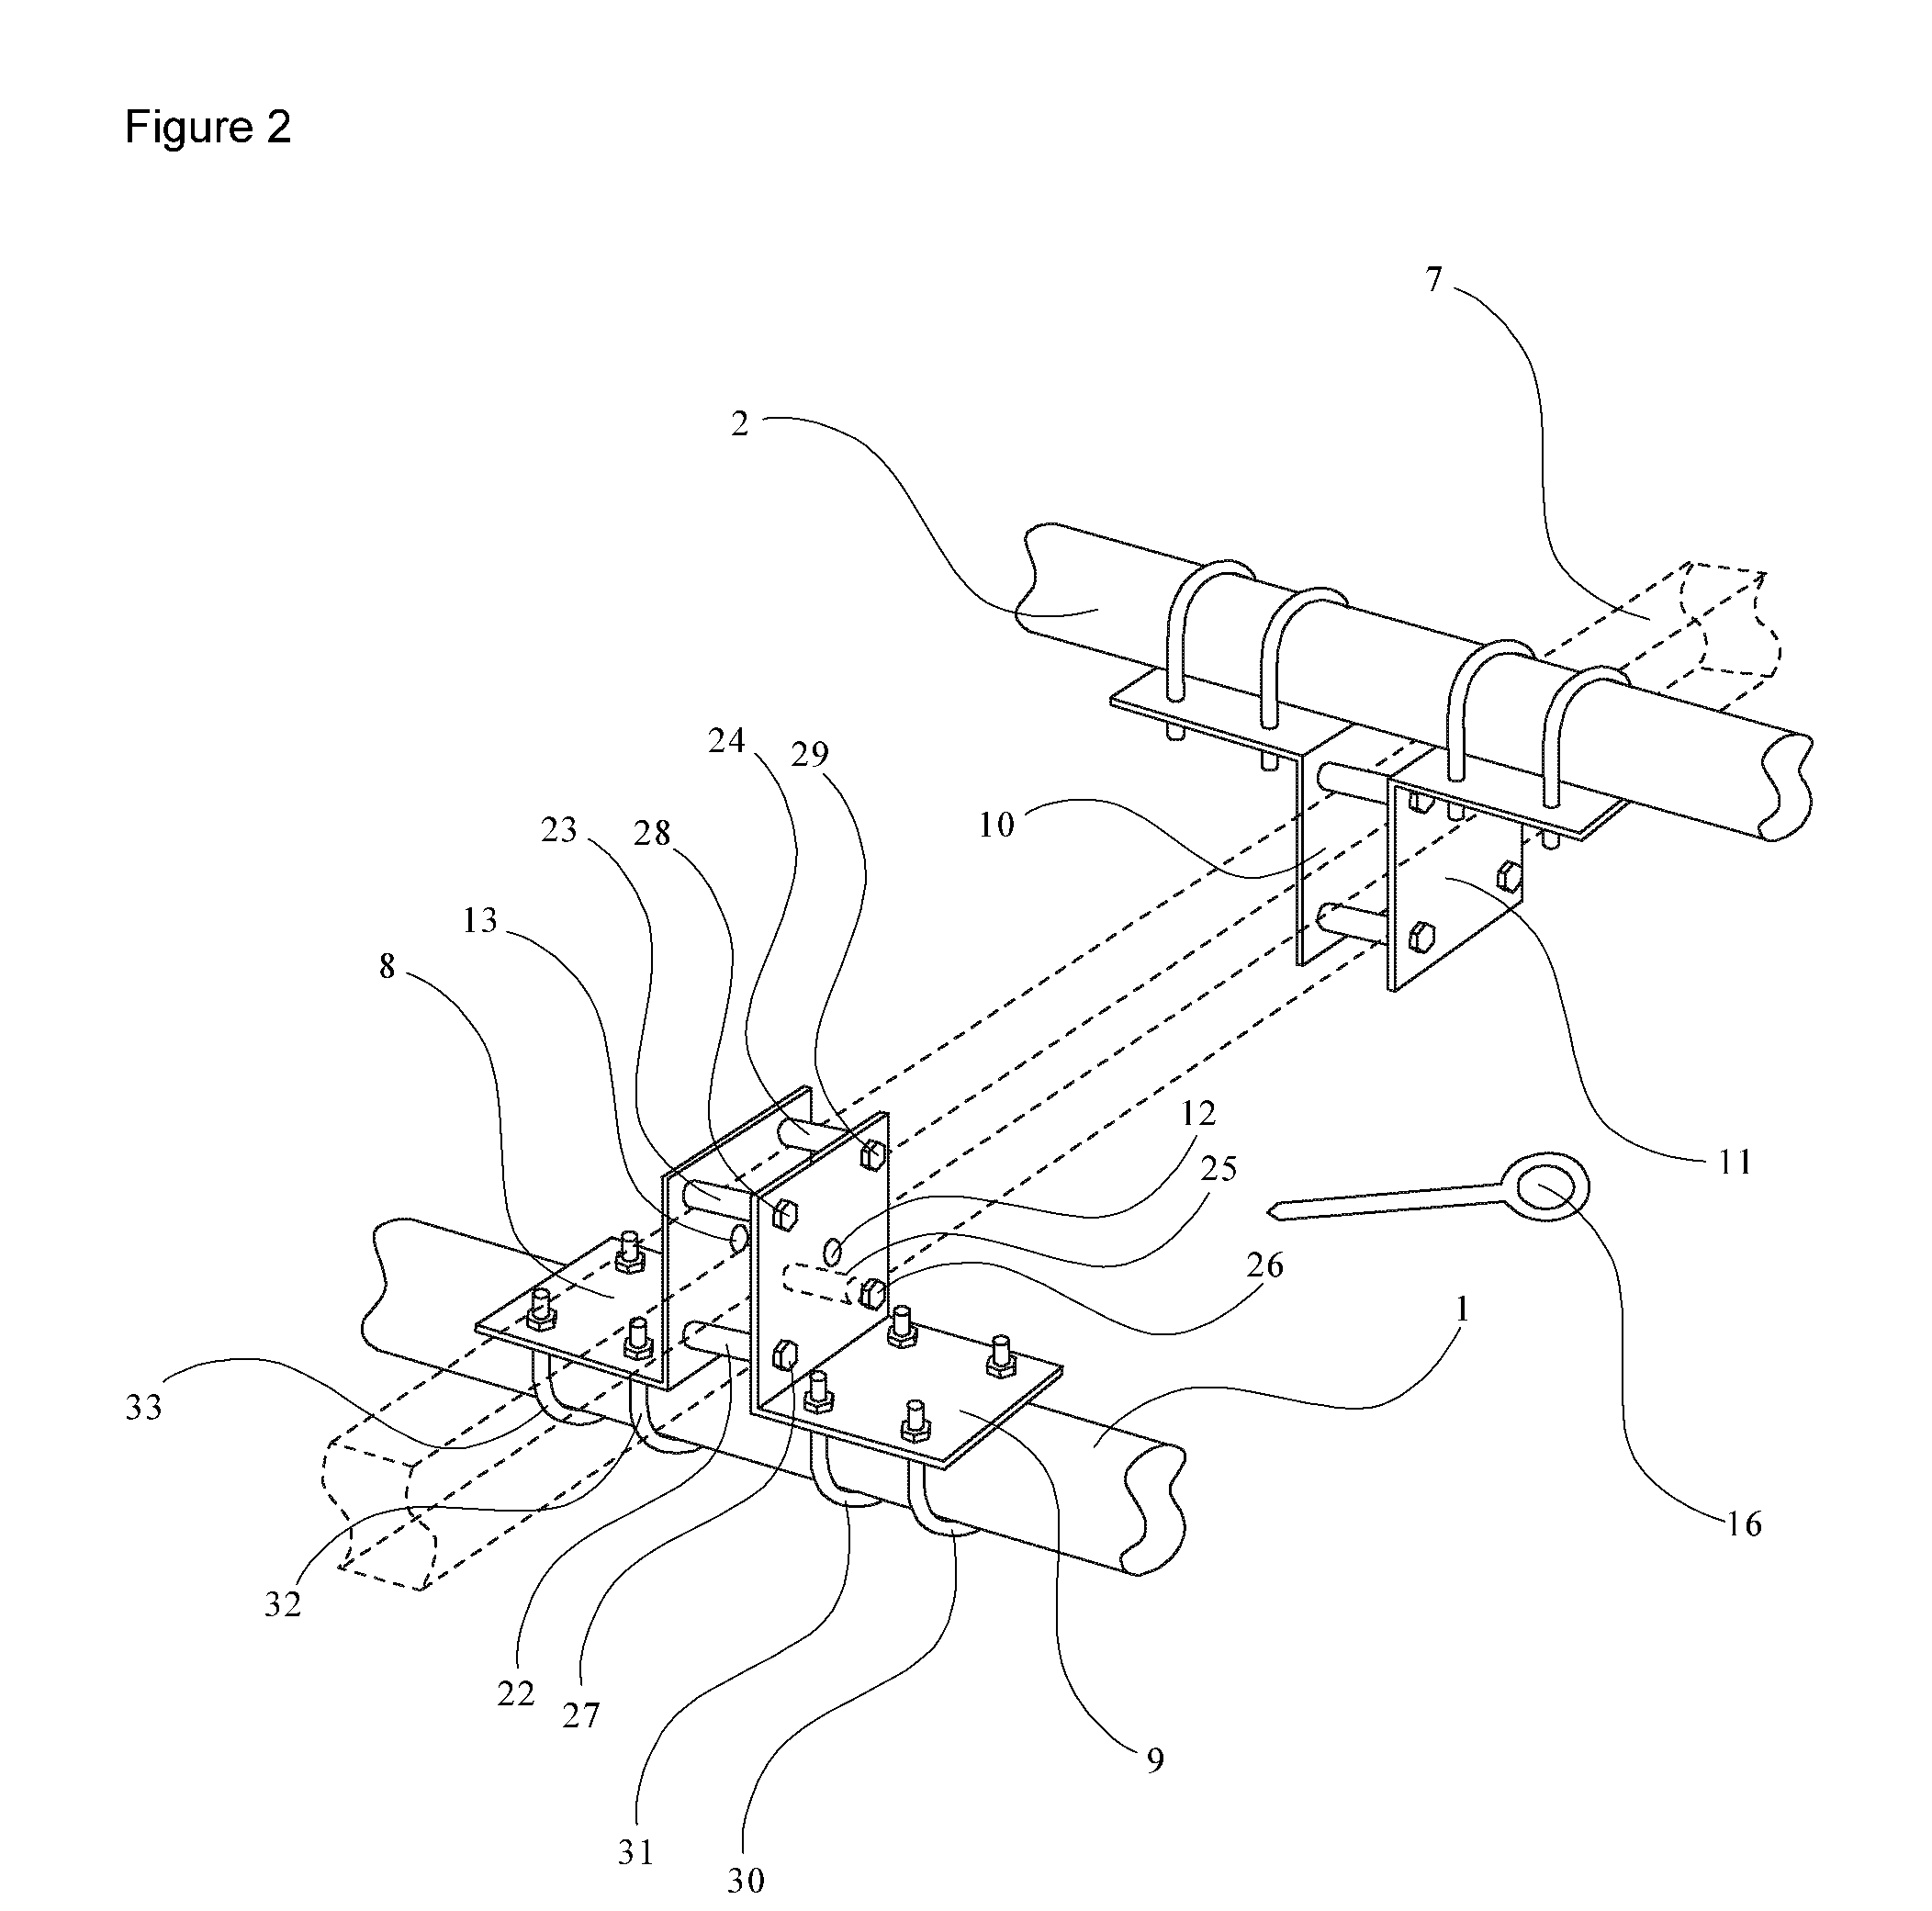 Systems and methods of loading and unloading a vehicle